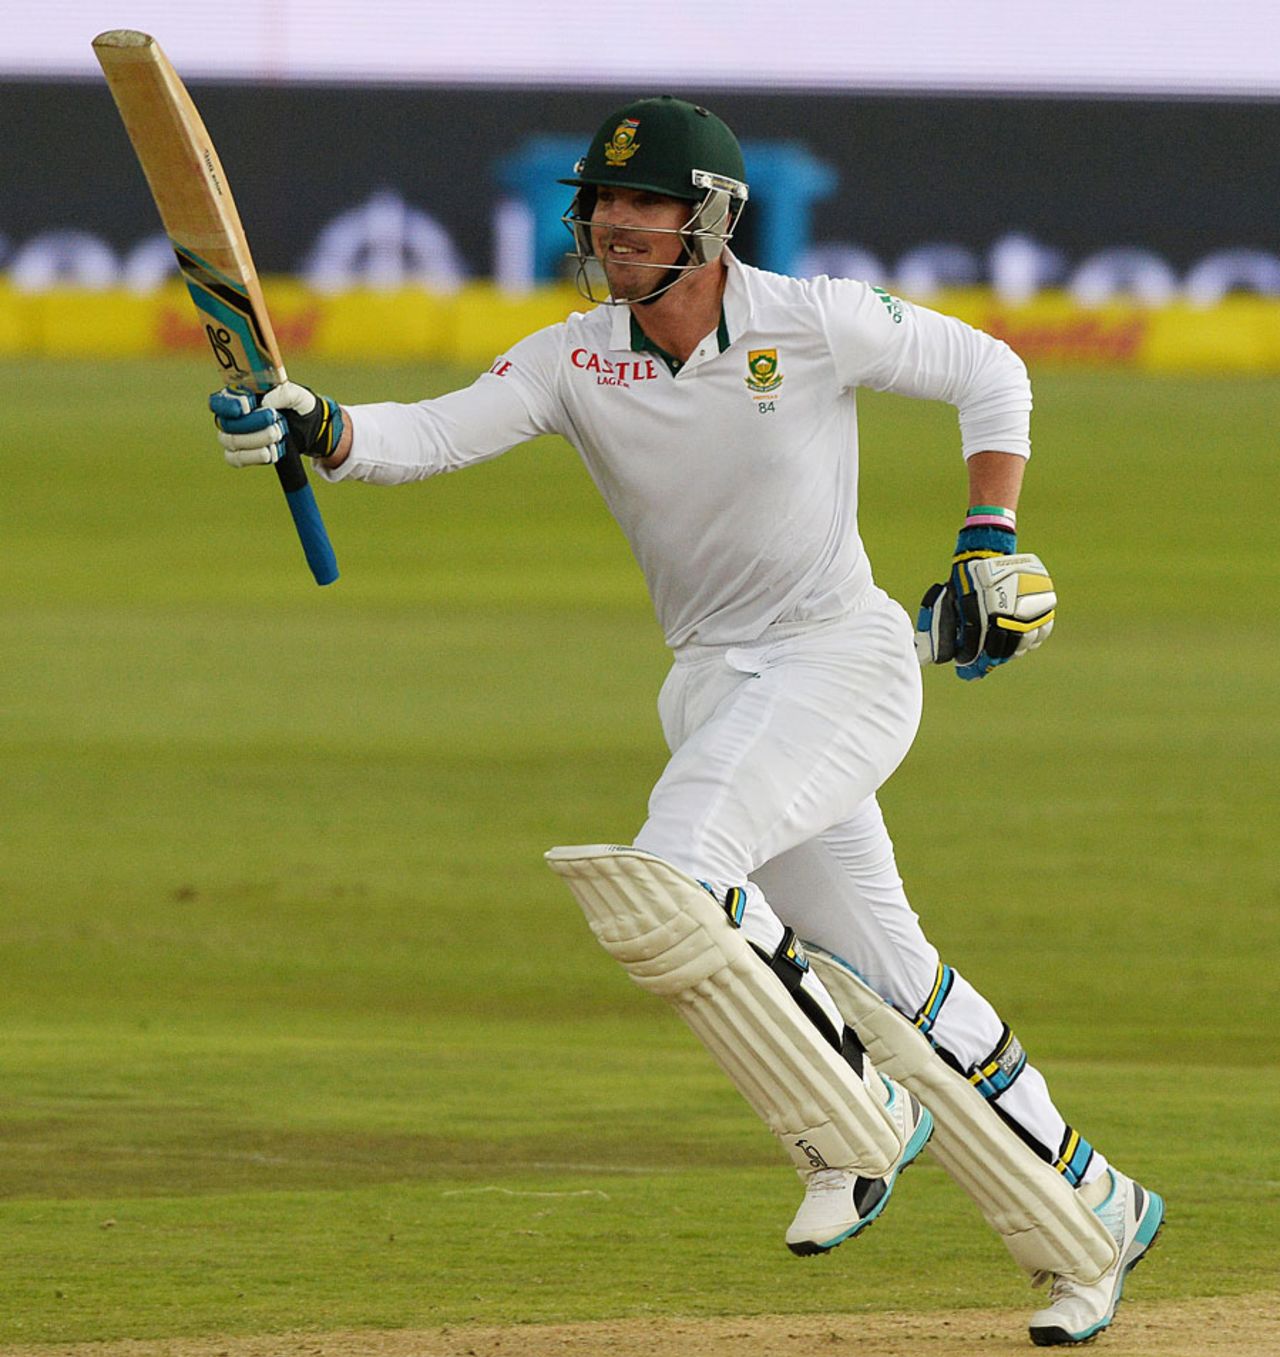 Stiaan van Zyl runs through to complete his hundred, South Africa v West Indies, 1st Test, Centurion, 2nd day, December 18, 2014